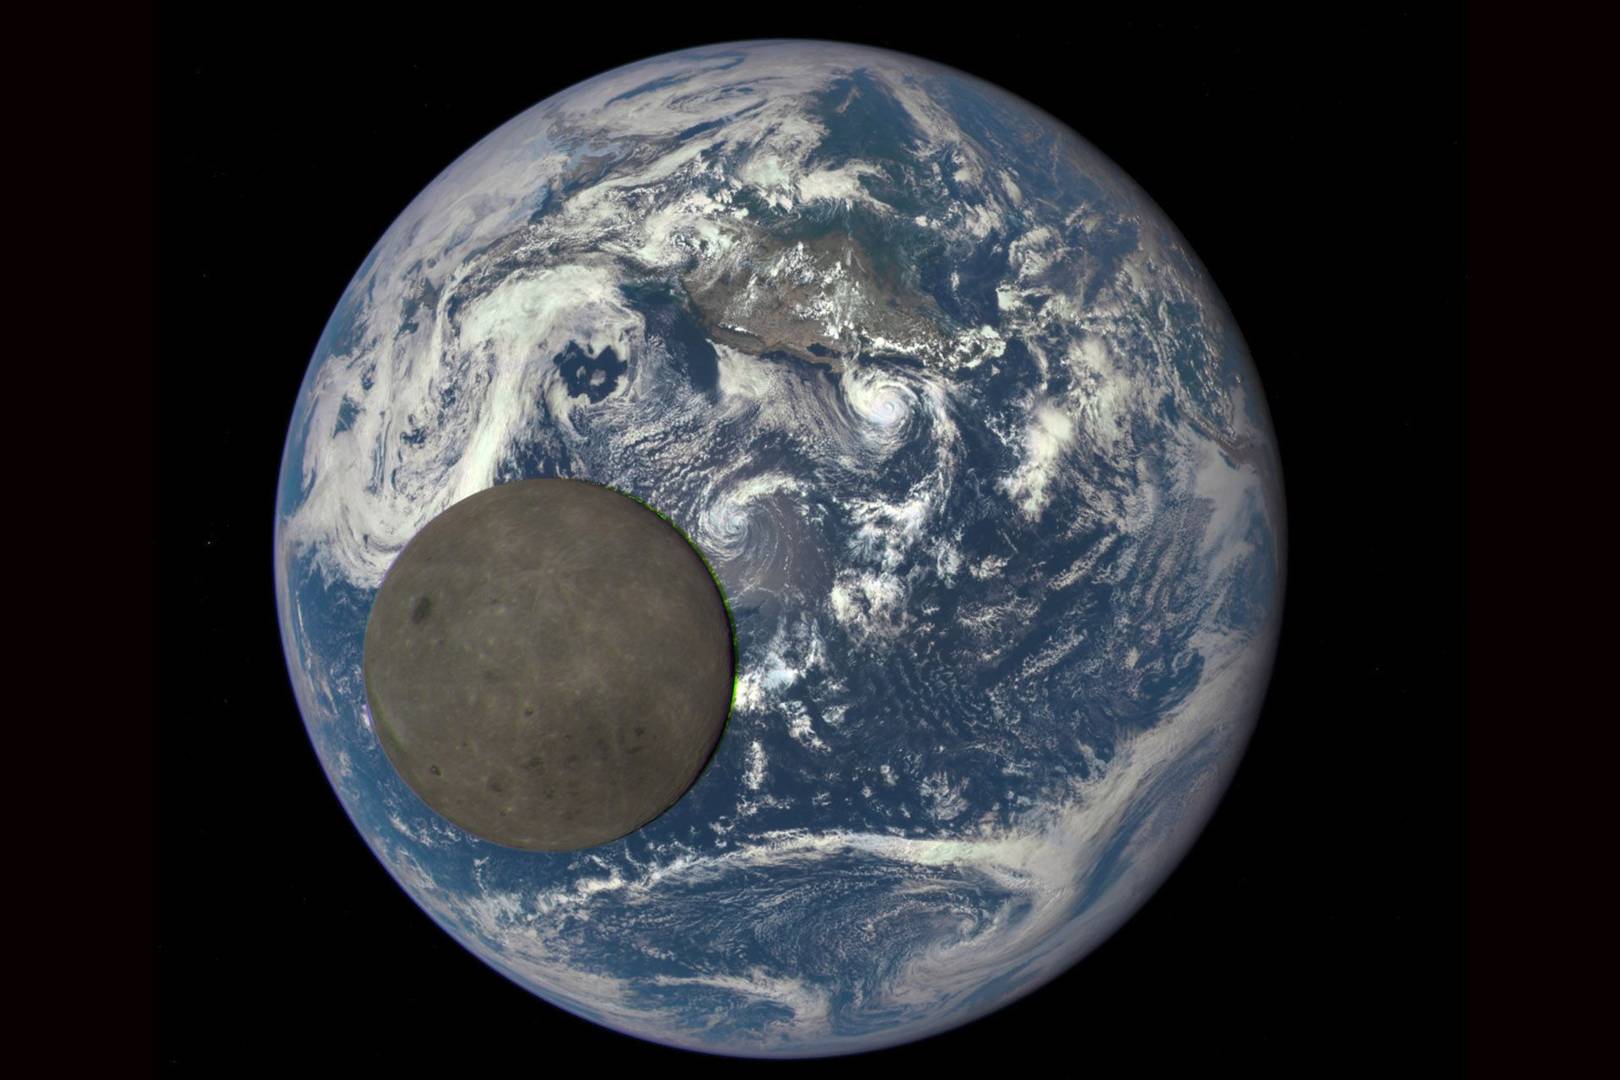 One punch or several crashes: how did the Moon form?